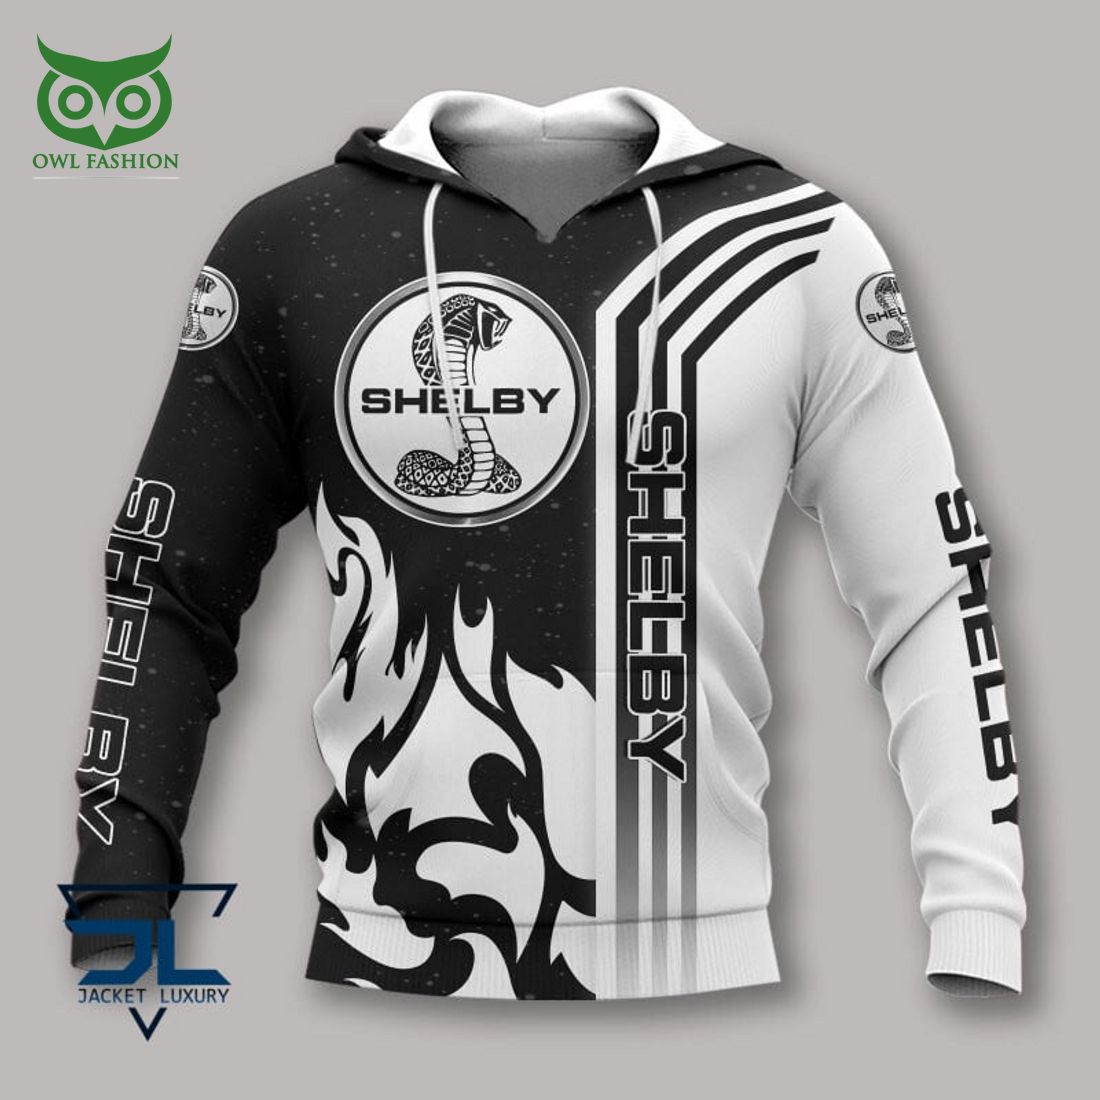 Ford Shelby Motor Car 3D Tshirt Polo Such a scenic view ,looks great.